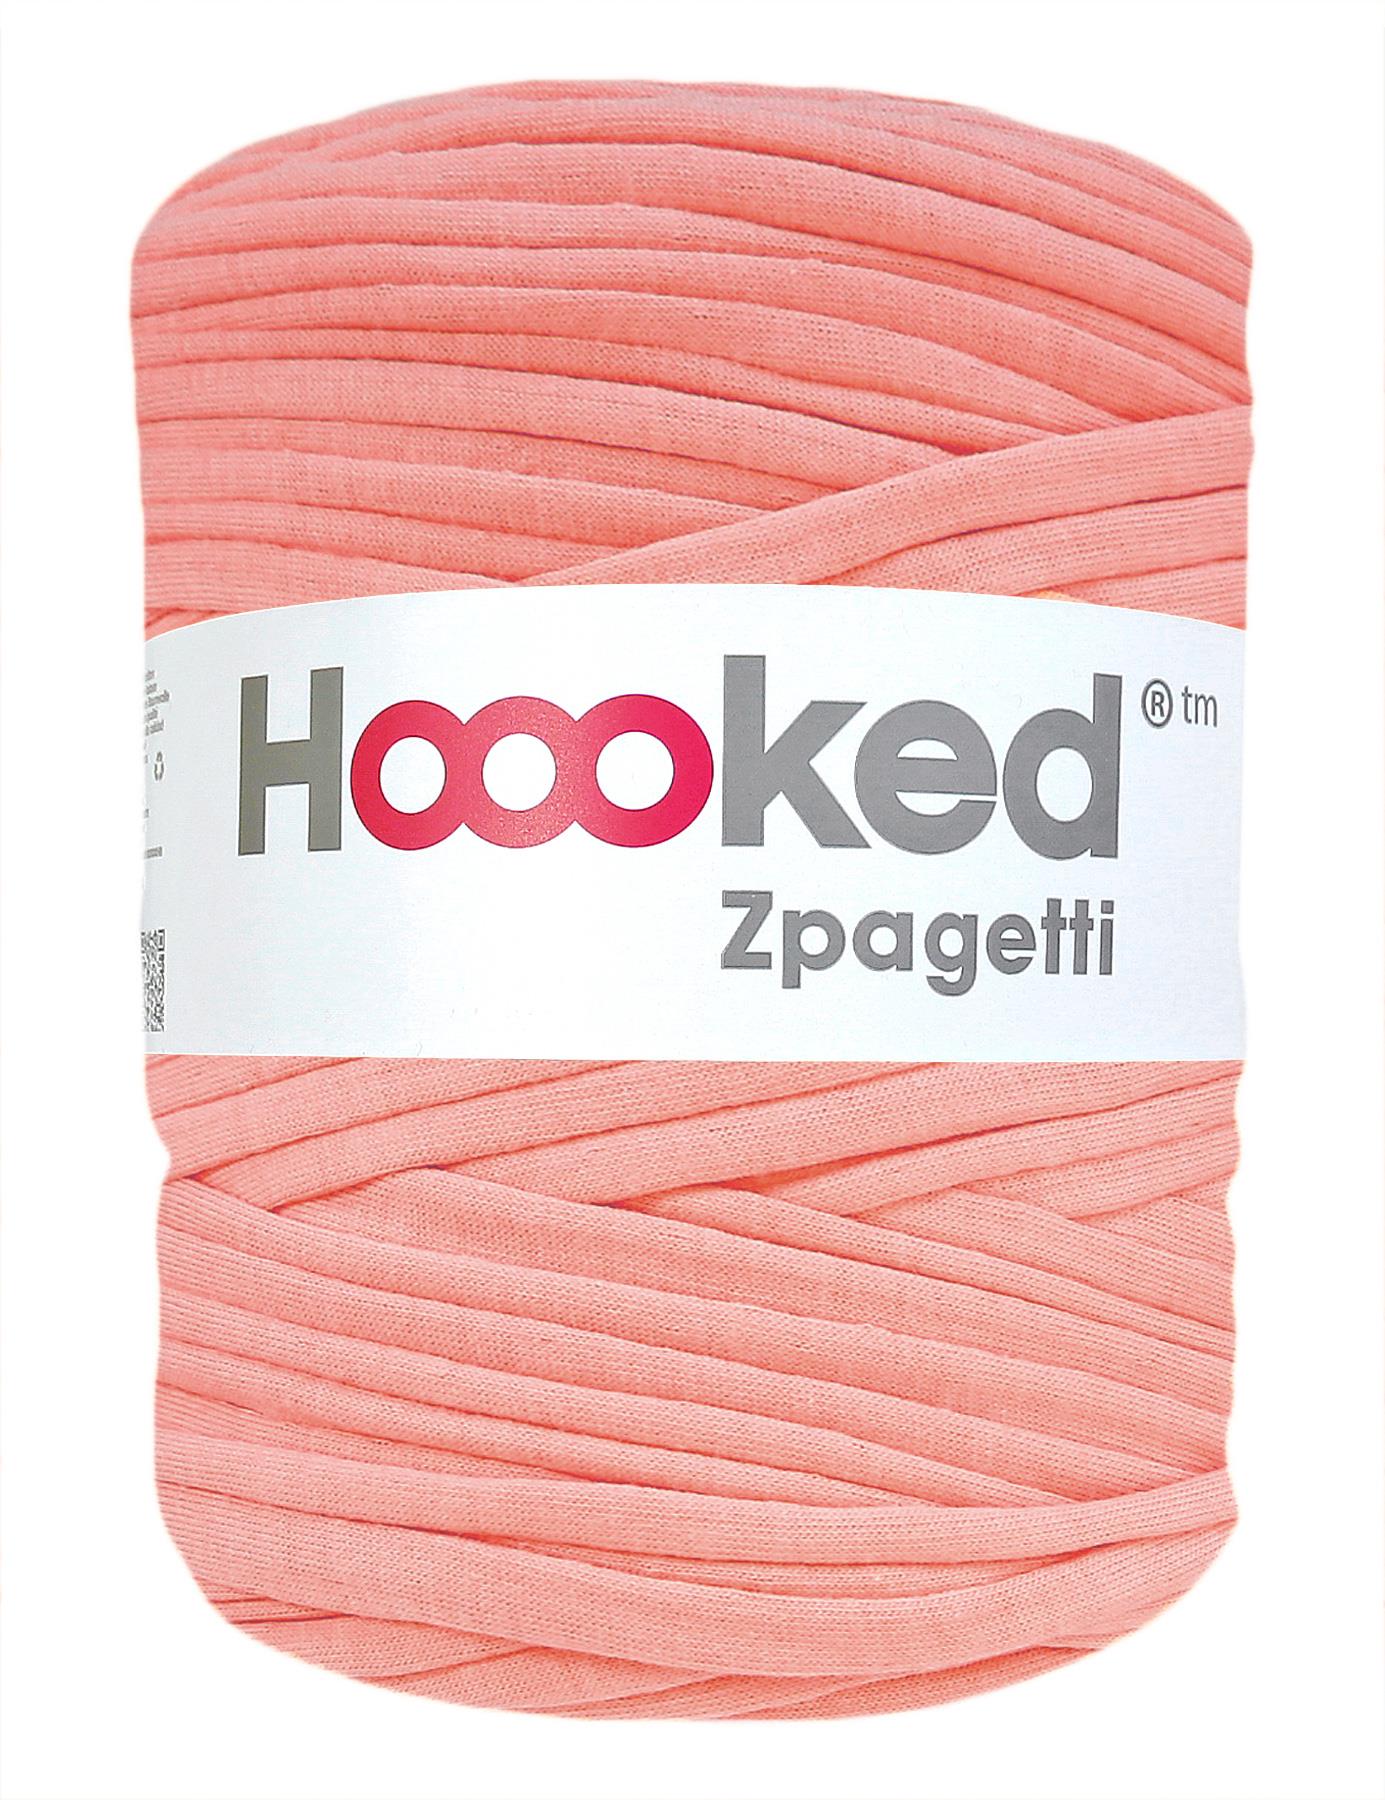 Peachy pink t-shirt yarn by Hoooked Zpagetti (100-120m)